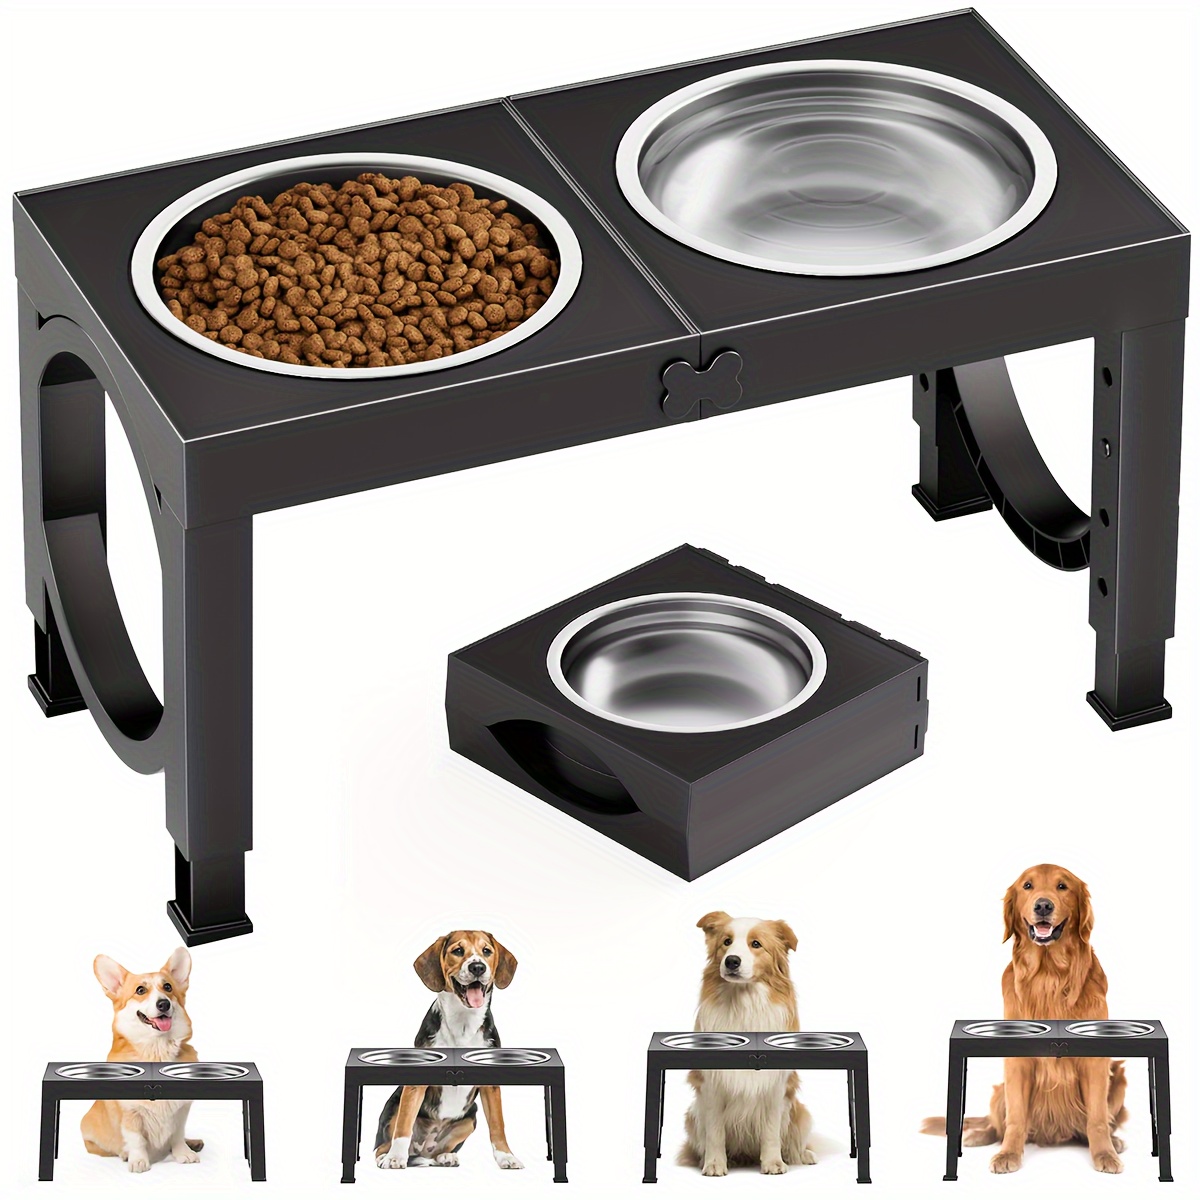 

1 Set Elevated Dog Bowl, Collapsible Design, 4 Height Adjustable Dog Raised Bowls Stand, 2pcs Thick Stainless Steel Dog Food Water Bowls For Medium And Large Sized Dogs